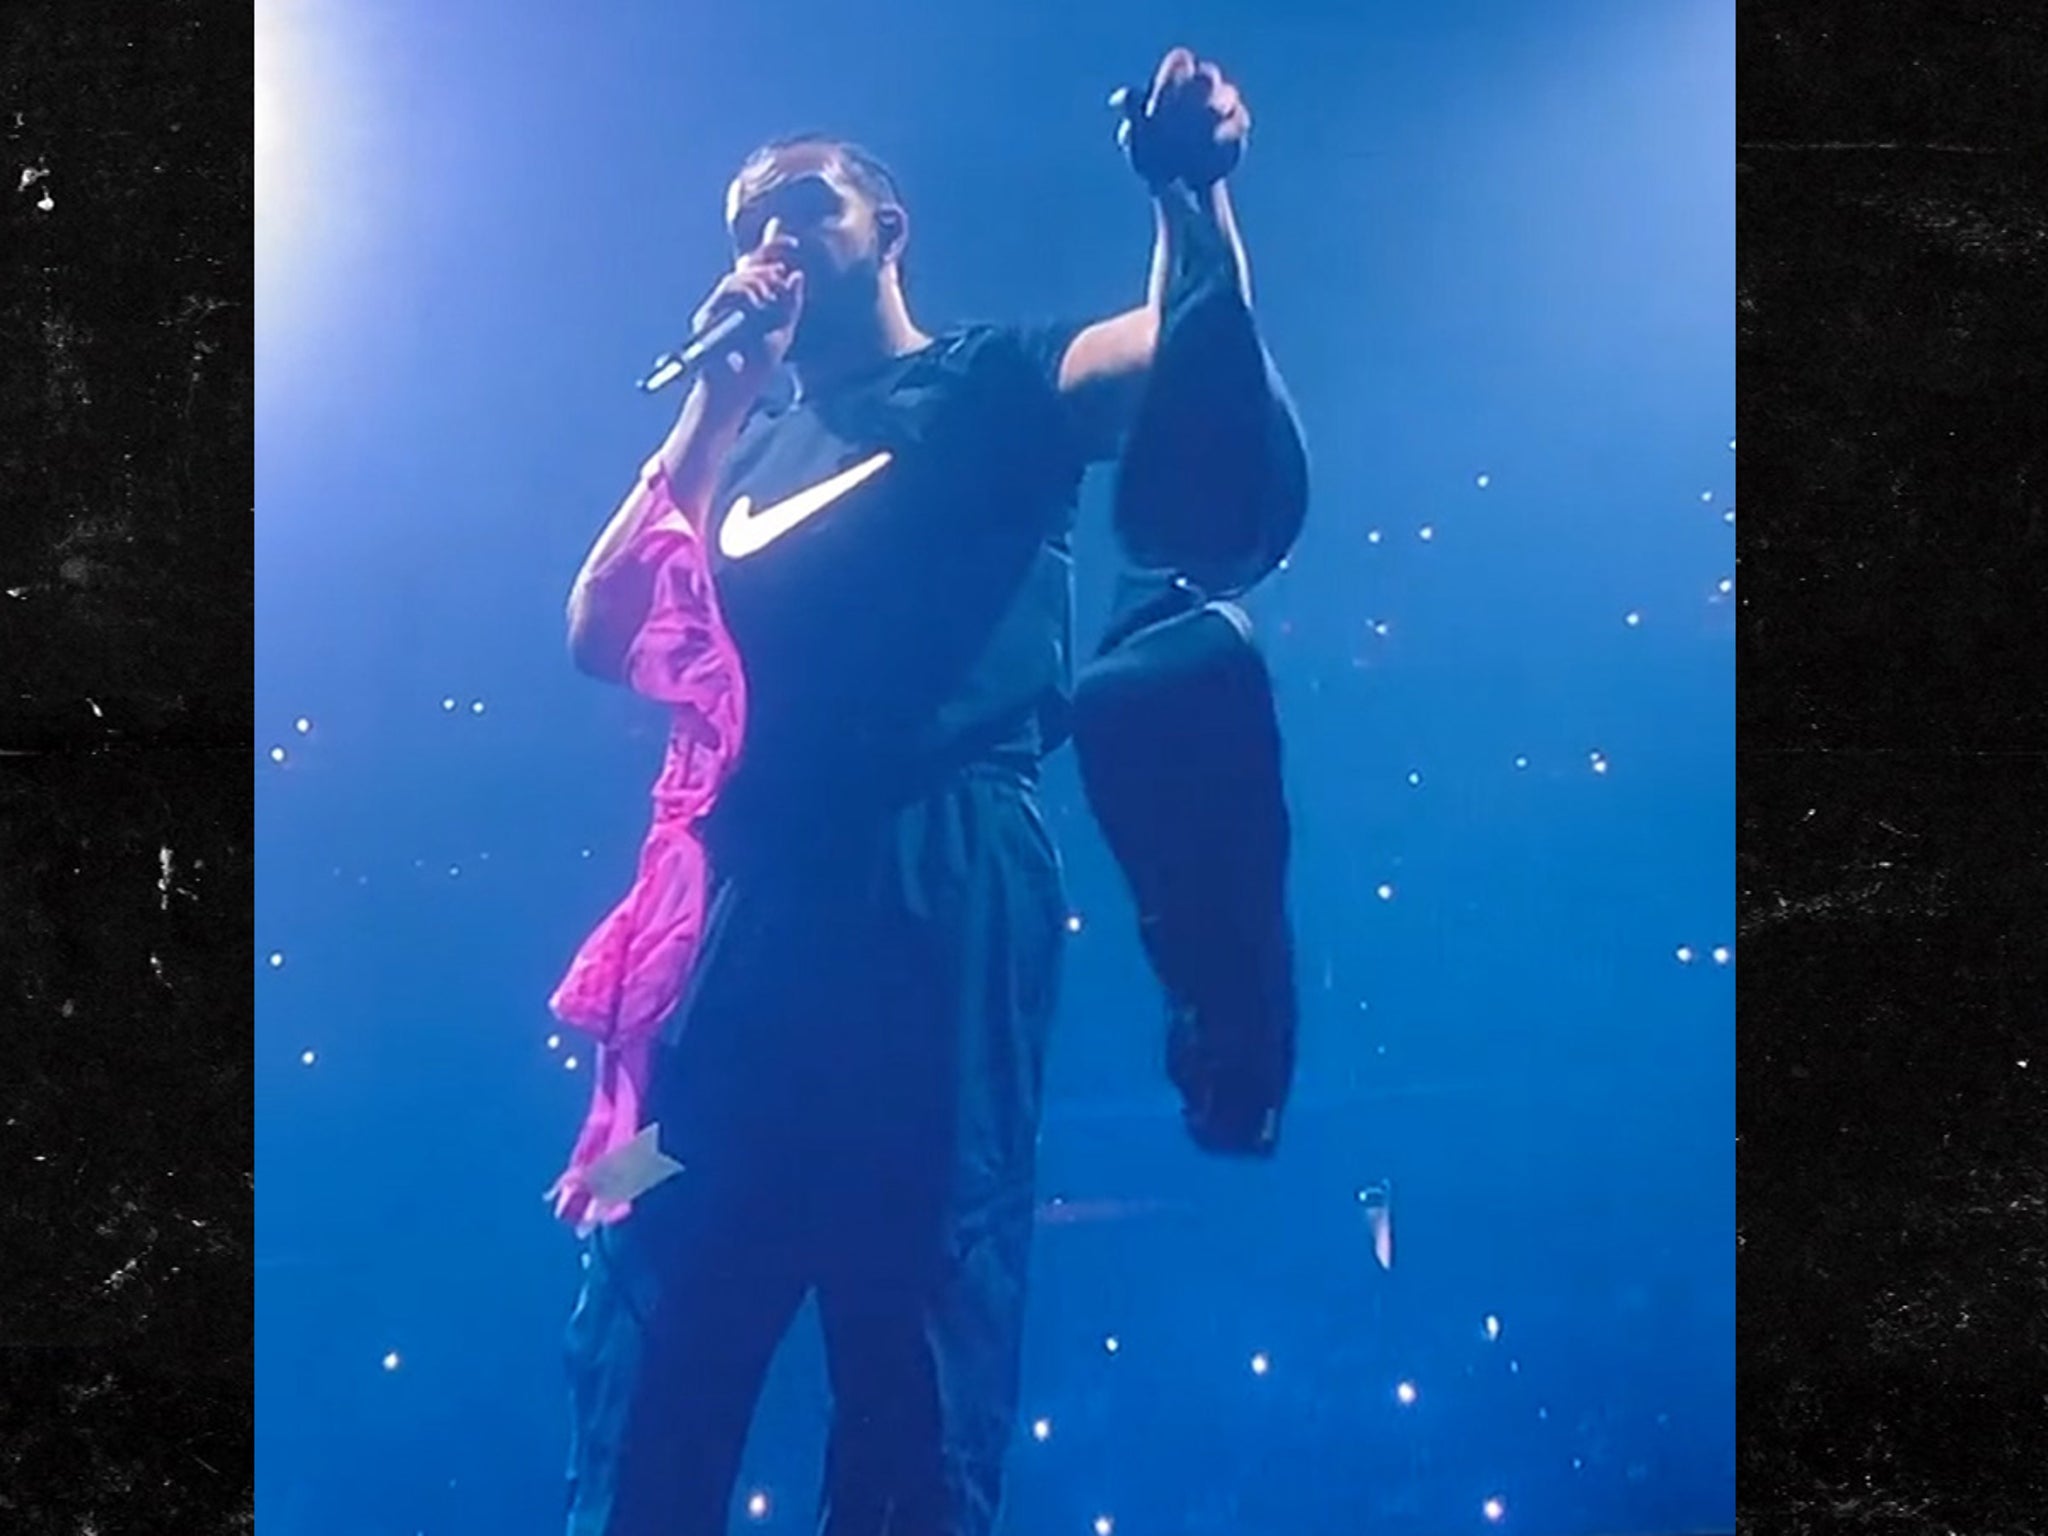 Drake stunned after a bigger 46G bra is thrown at him on stage 